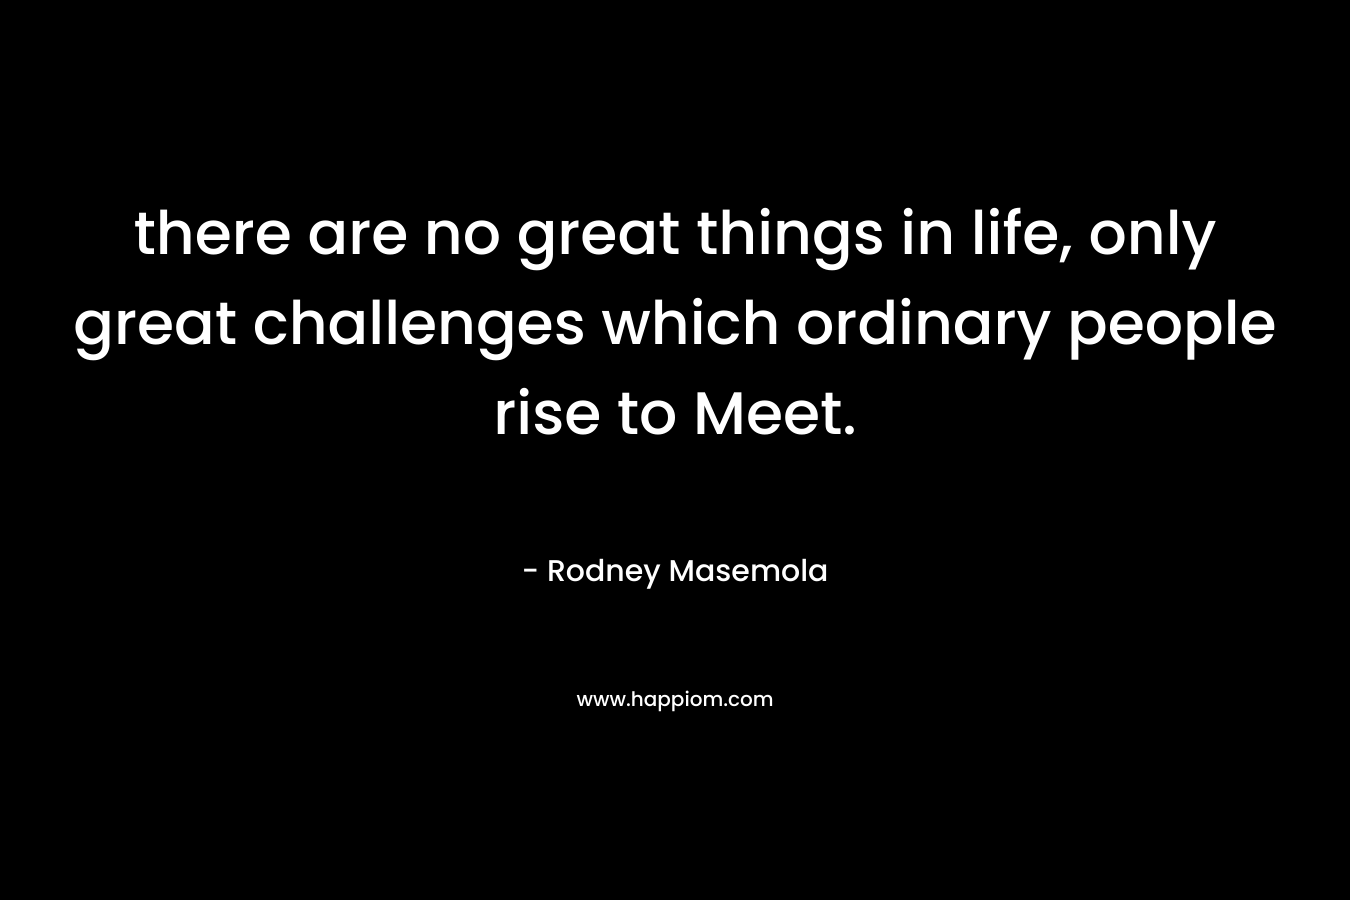 there are no great things in life, only great challenges which ordinary people rise to Meet.